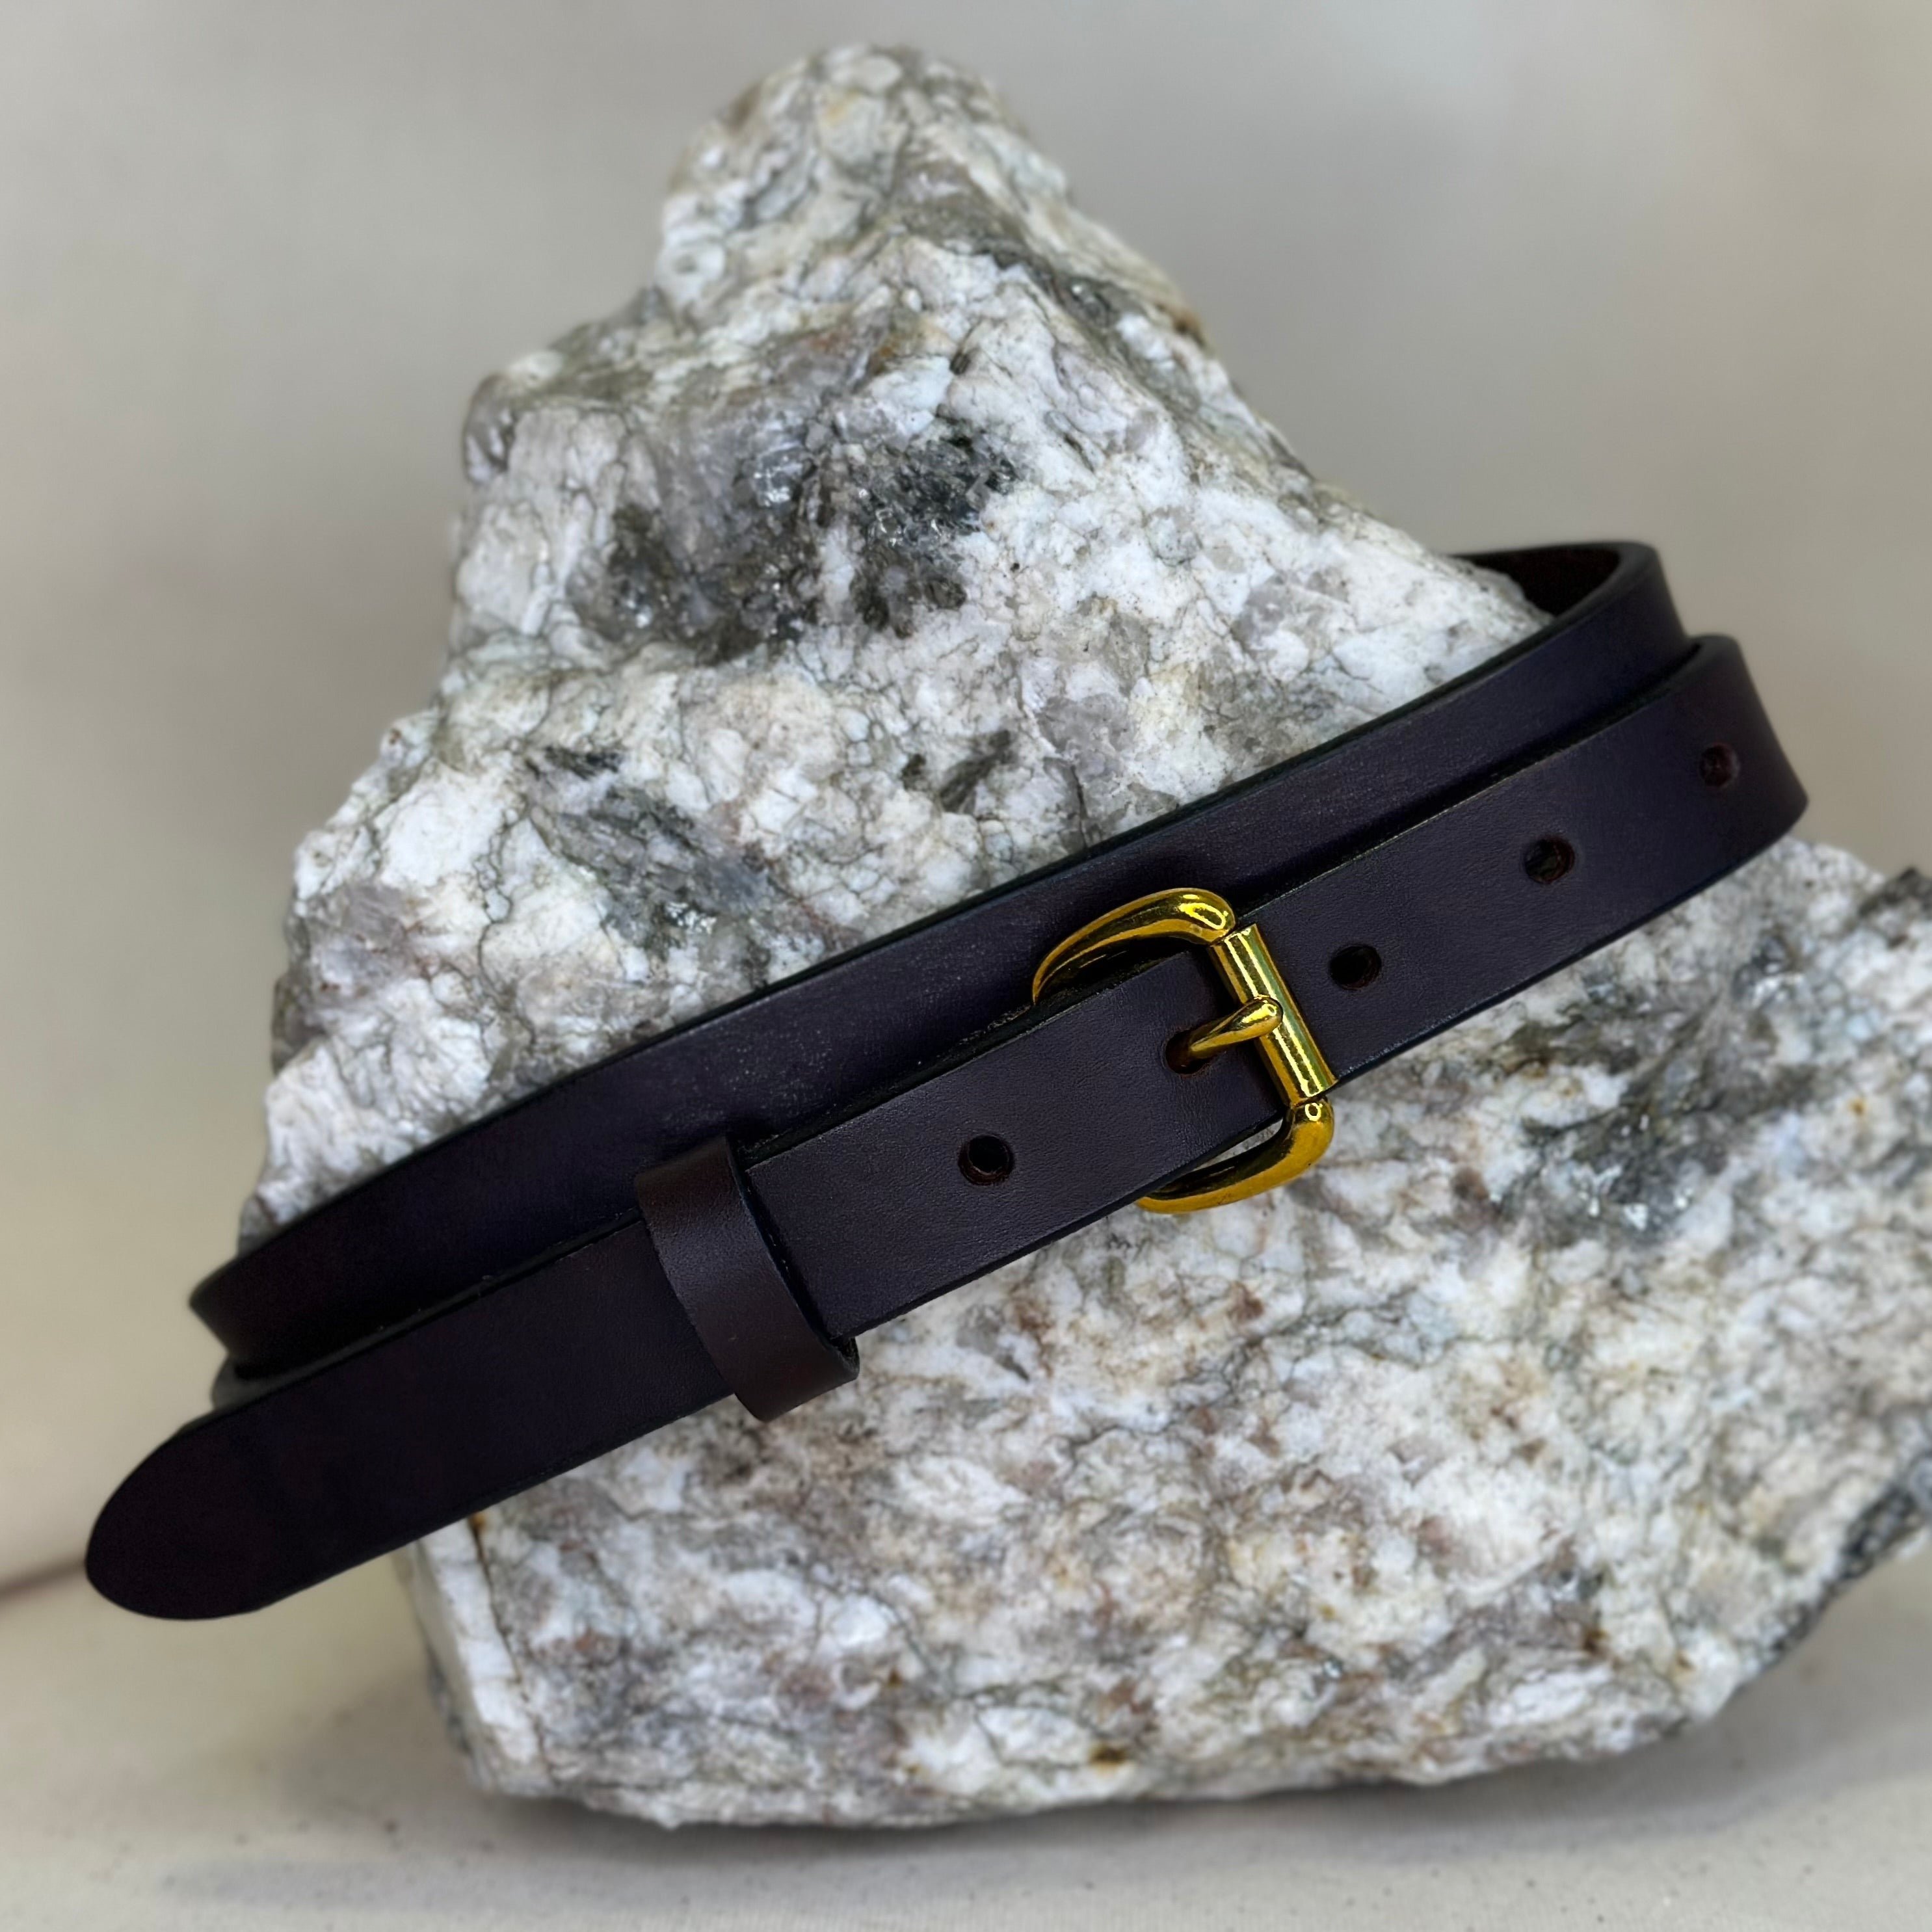 Shining Rock Goods one inch hand made solid leather belt with solid brass roller buckle